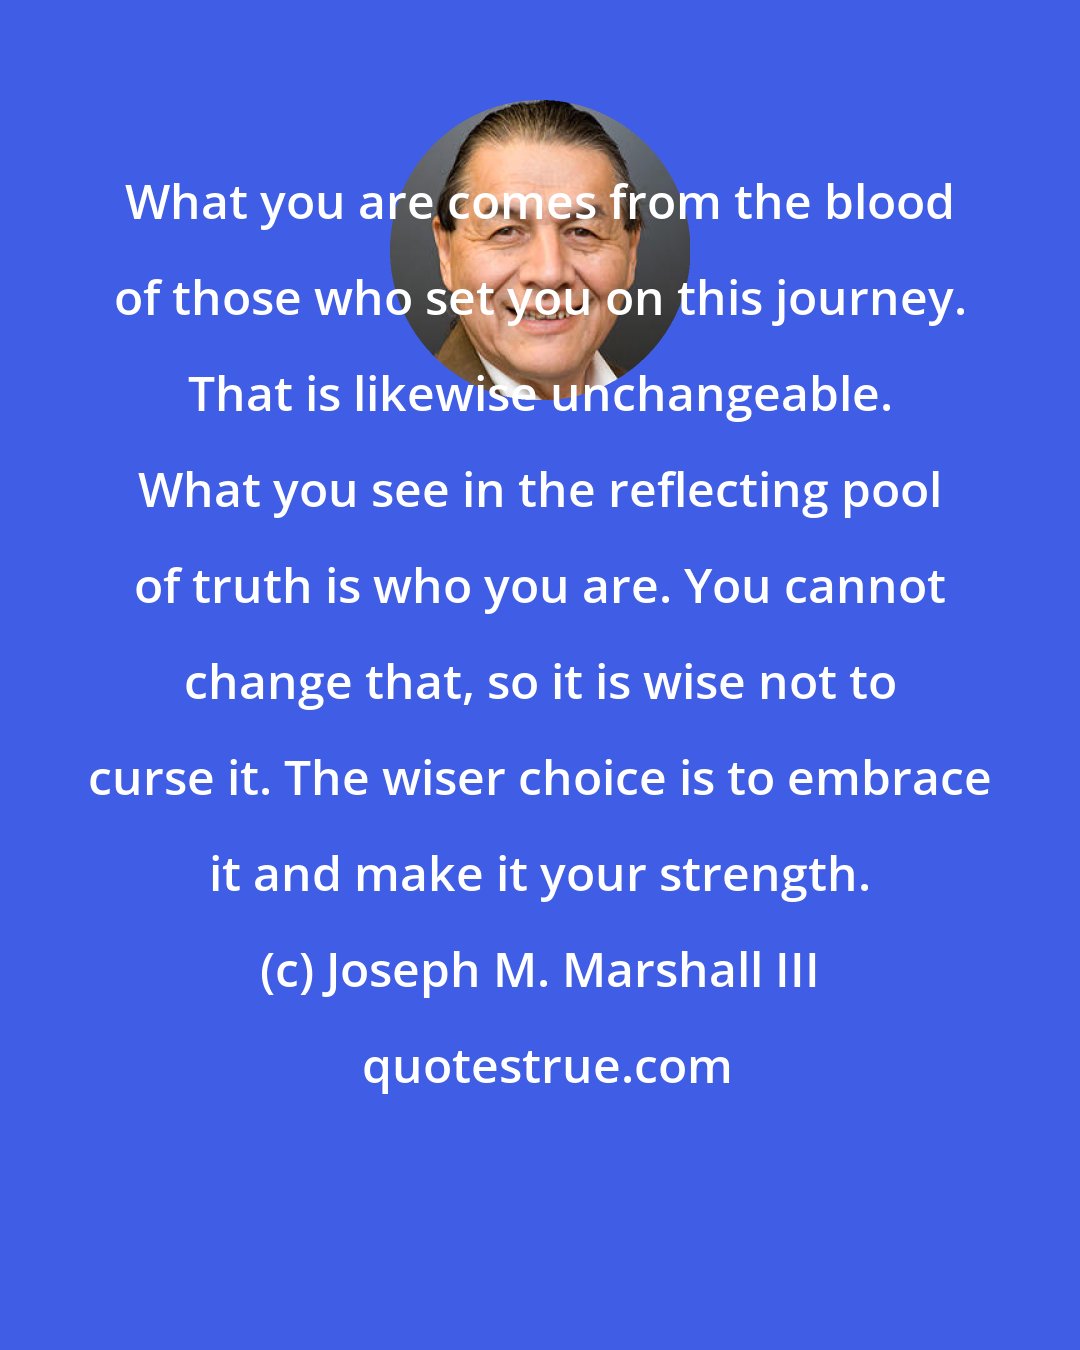 Joseph M. Marshall III: What you are comes from the blood of those who set you on this journey. That is likewise unchangeable. What you see in the reflecting pool of truth is who you are. You cannot change that, so it is wise not to curse it. The wiser choice is to embrace it and make it your strength.